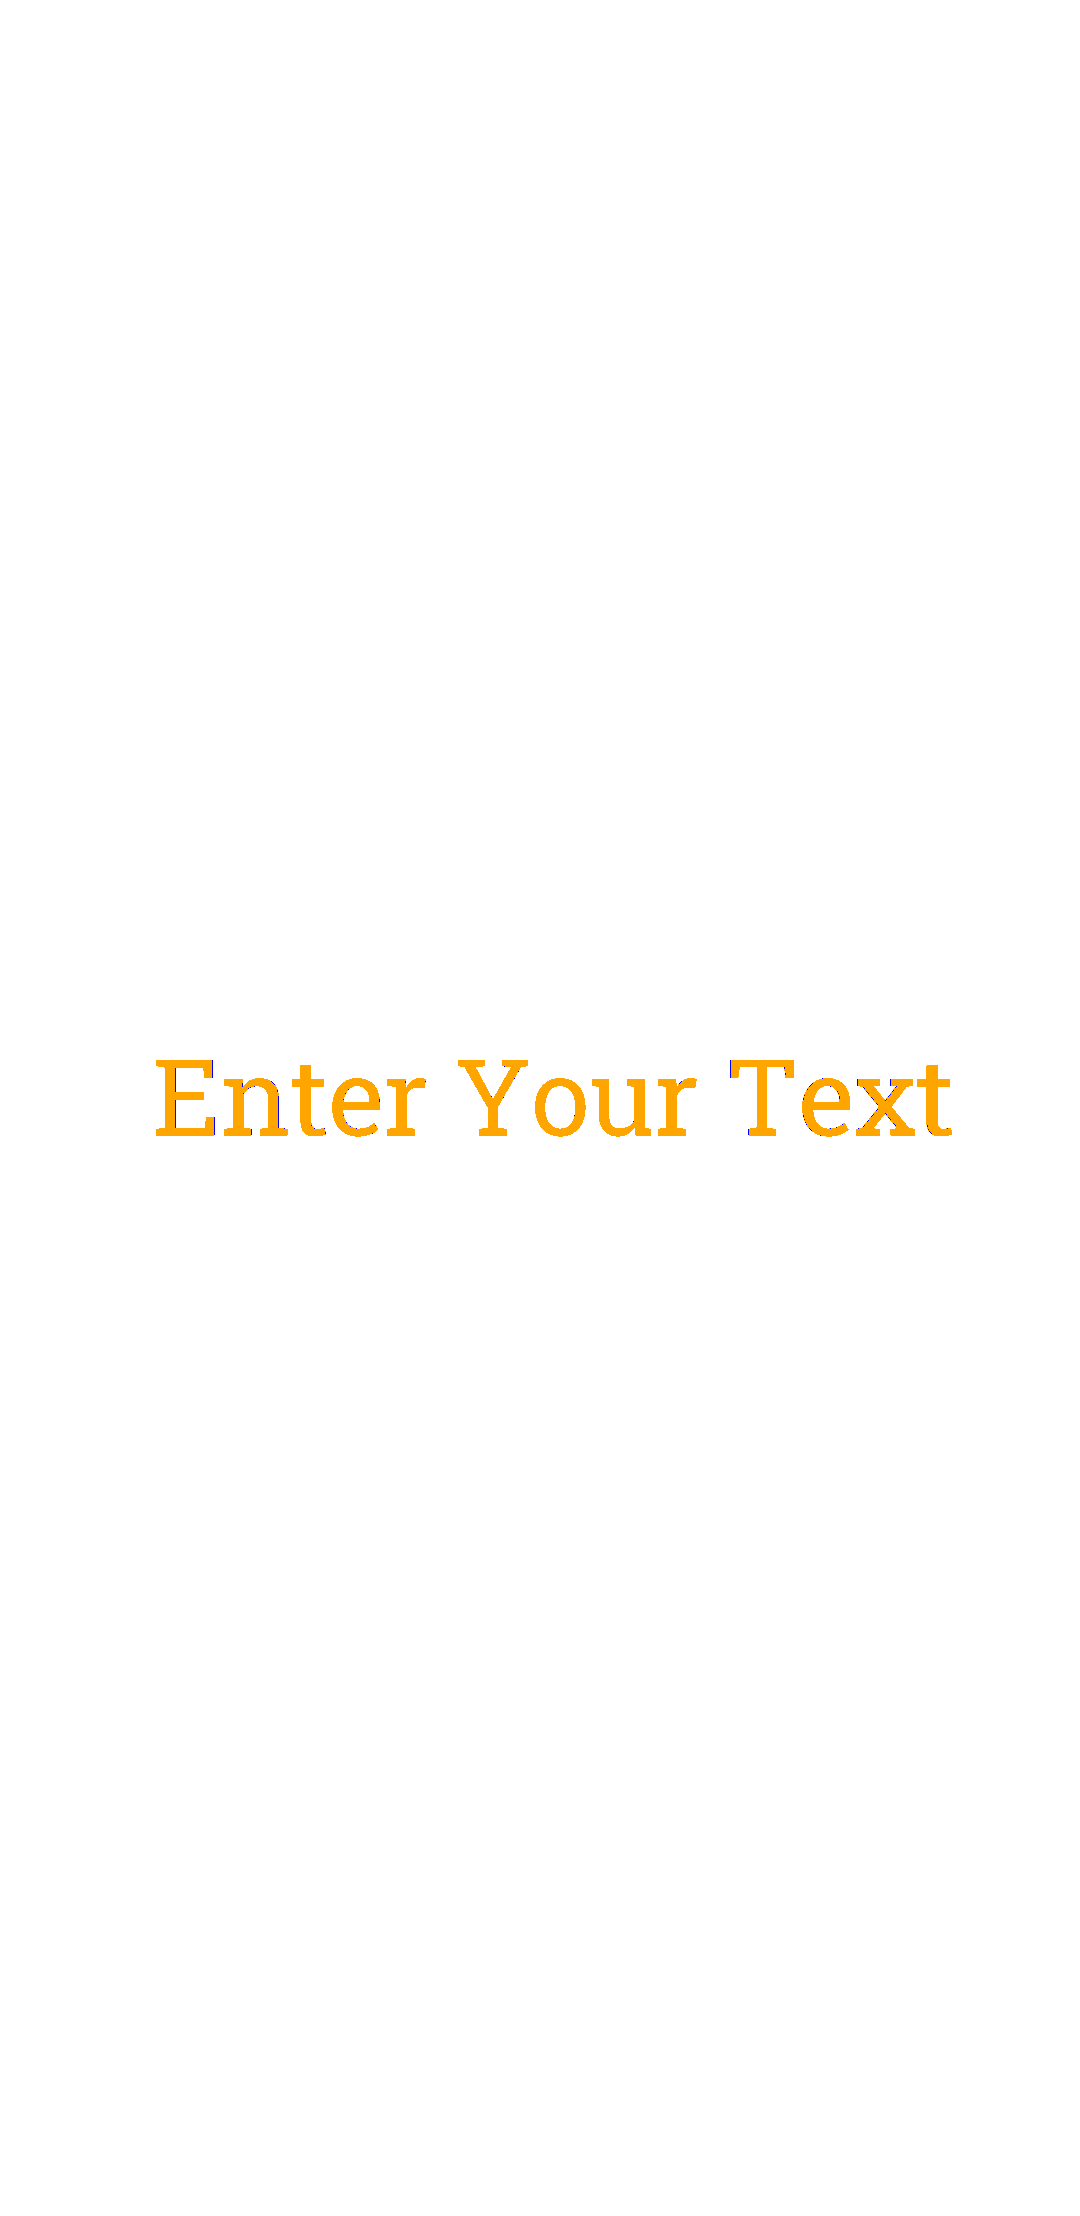 Enter Your Text:392